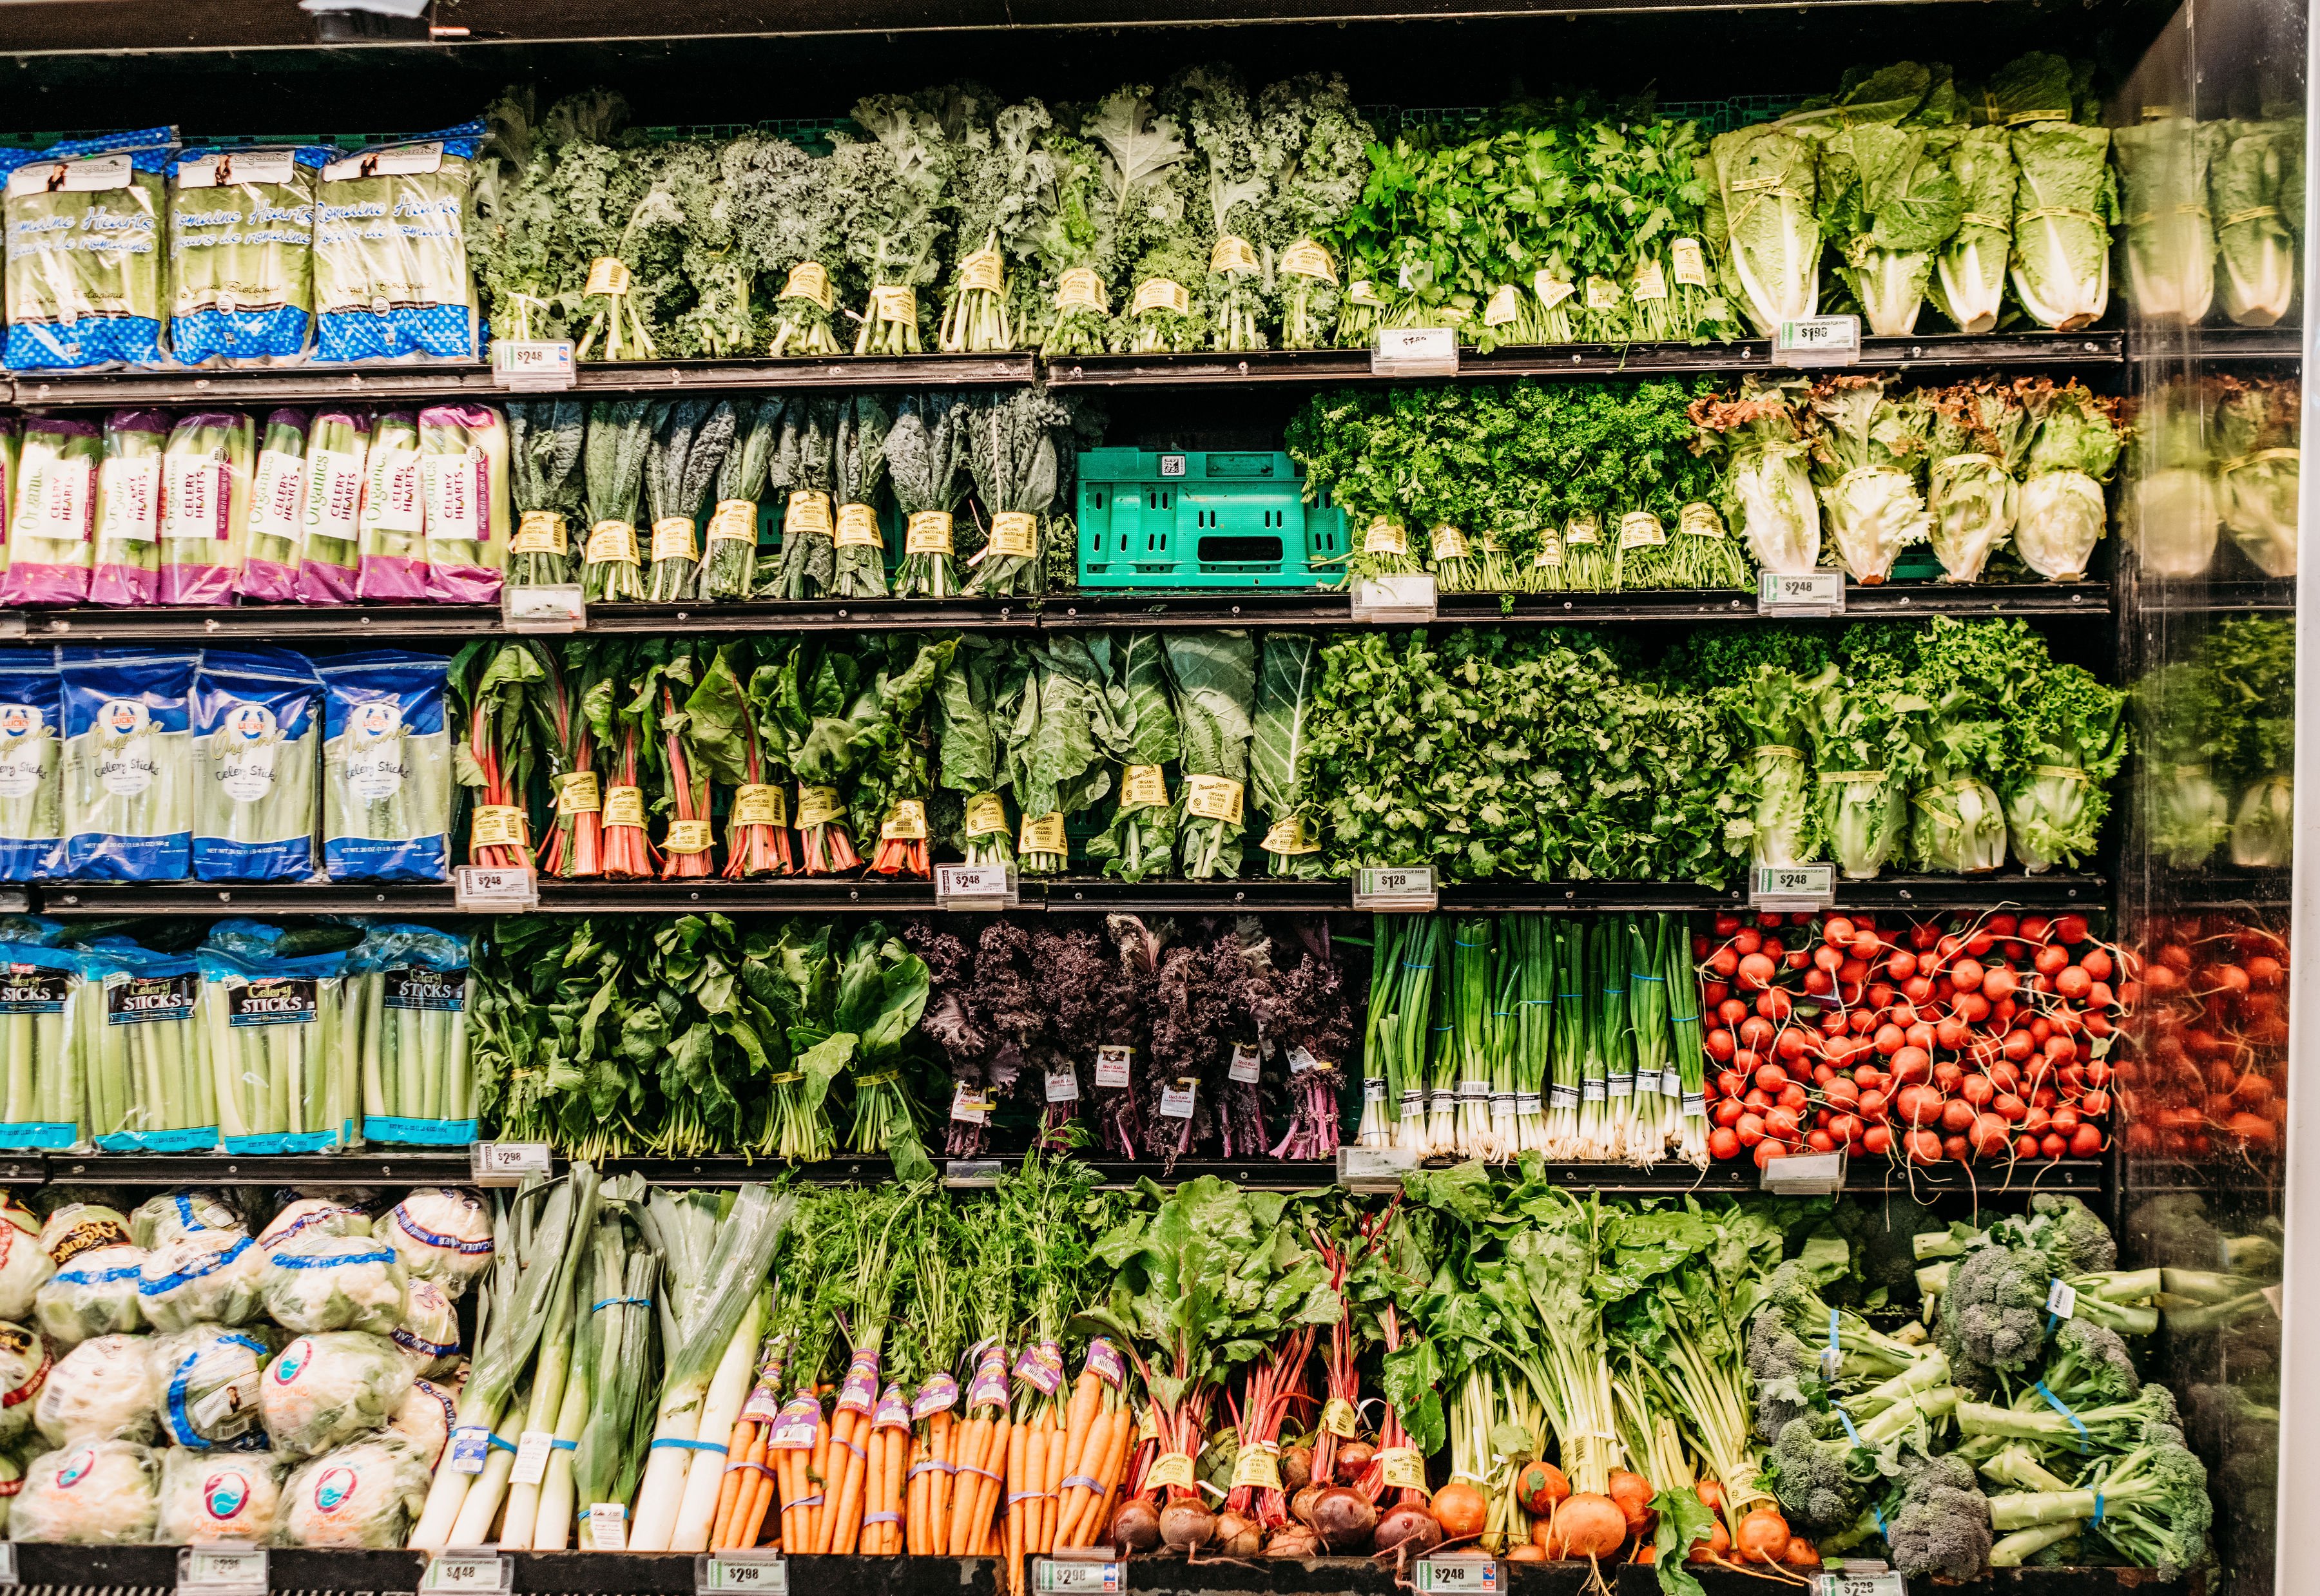 produce aisle at the grocery store with leeks, carrots, lettuces, radishes - where to buy groceries online